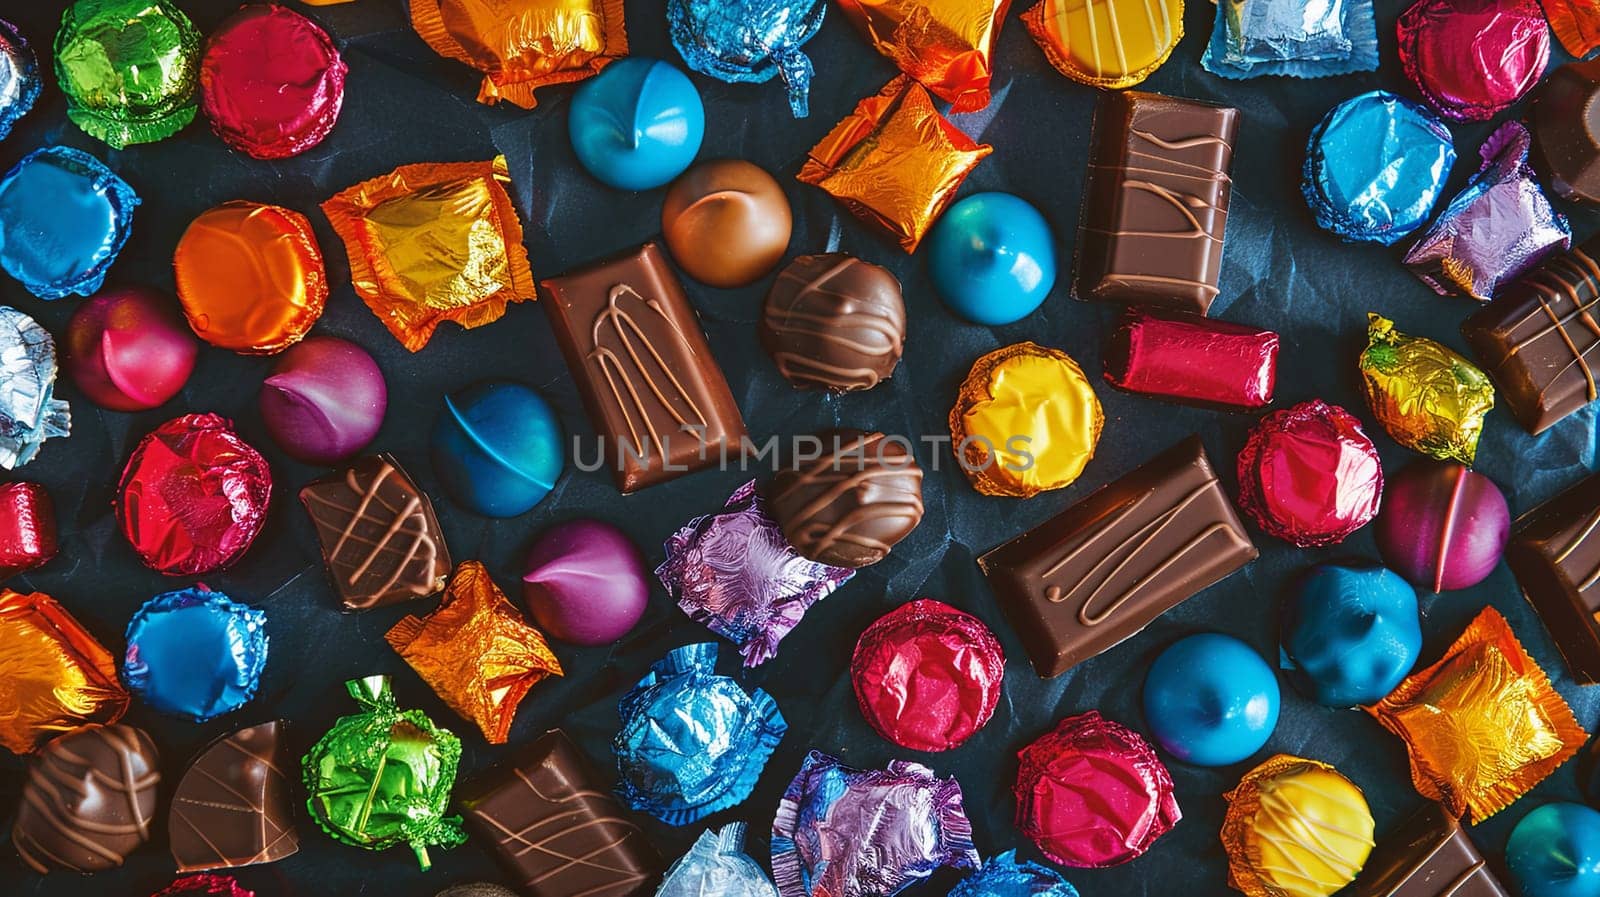 Various types of vibrant, shiny candies filling a table, creating a colorful display.